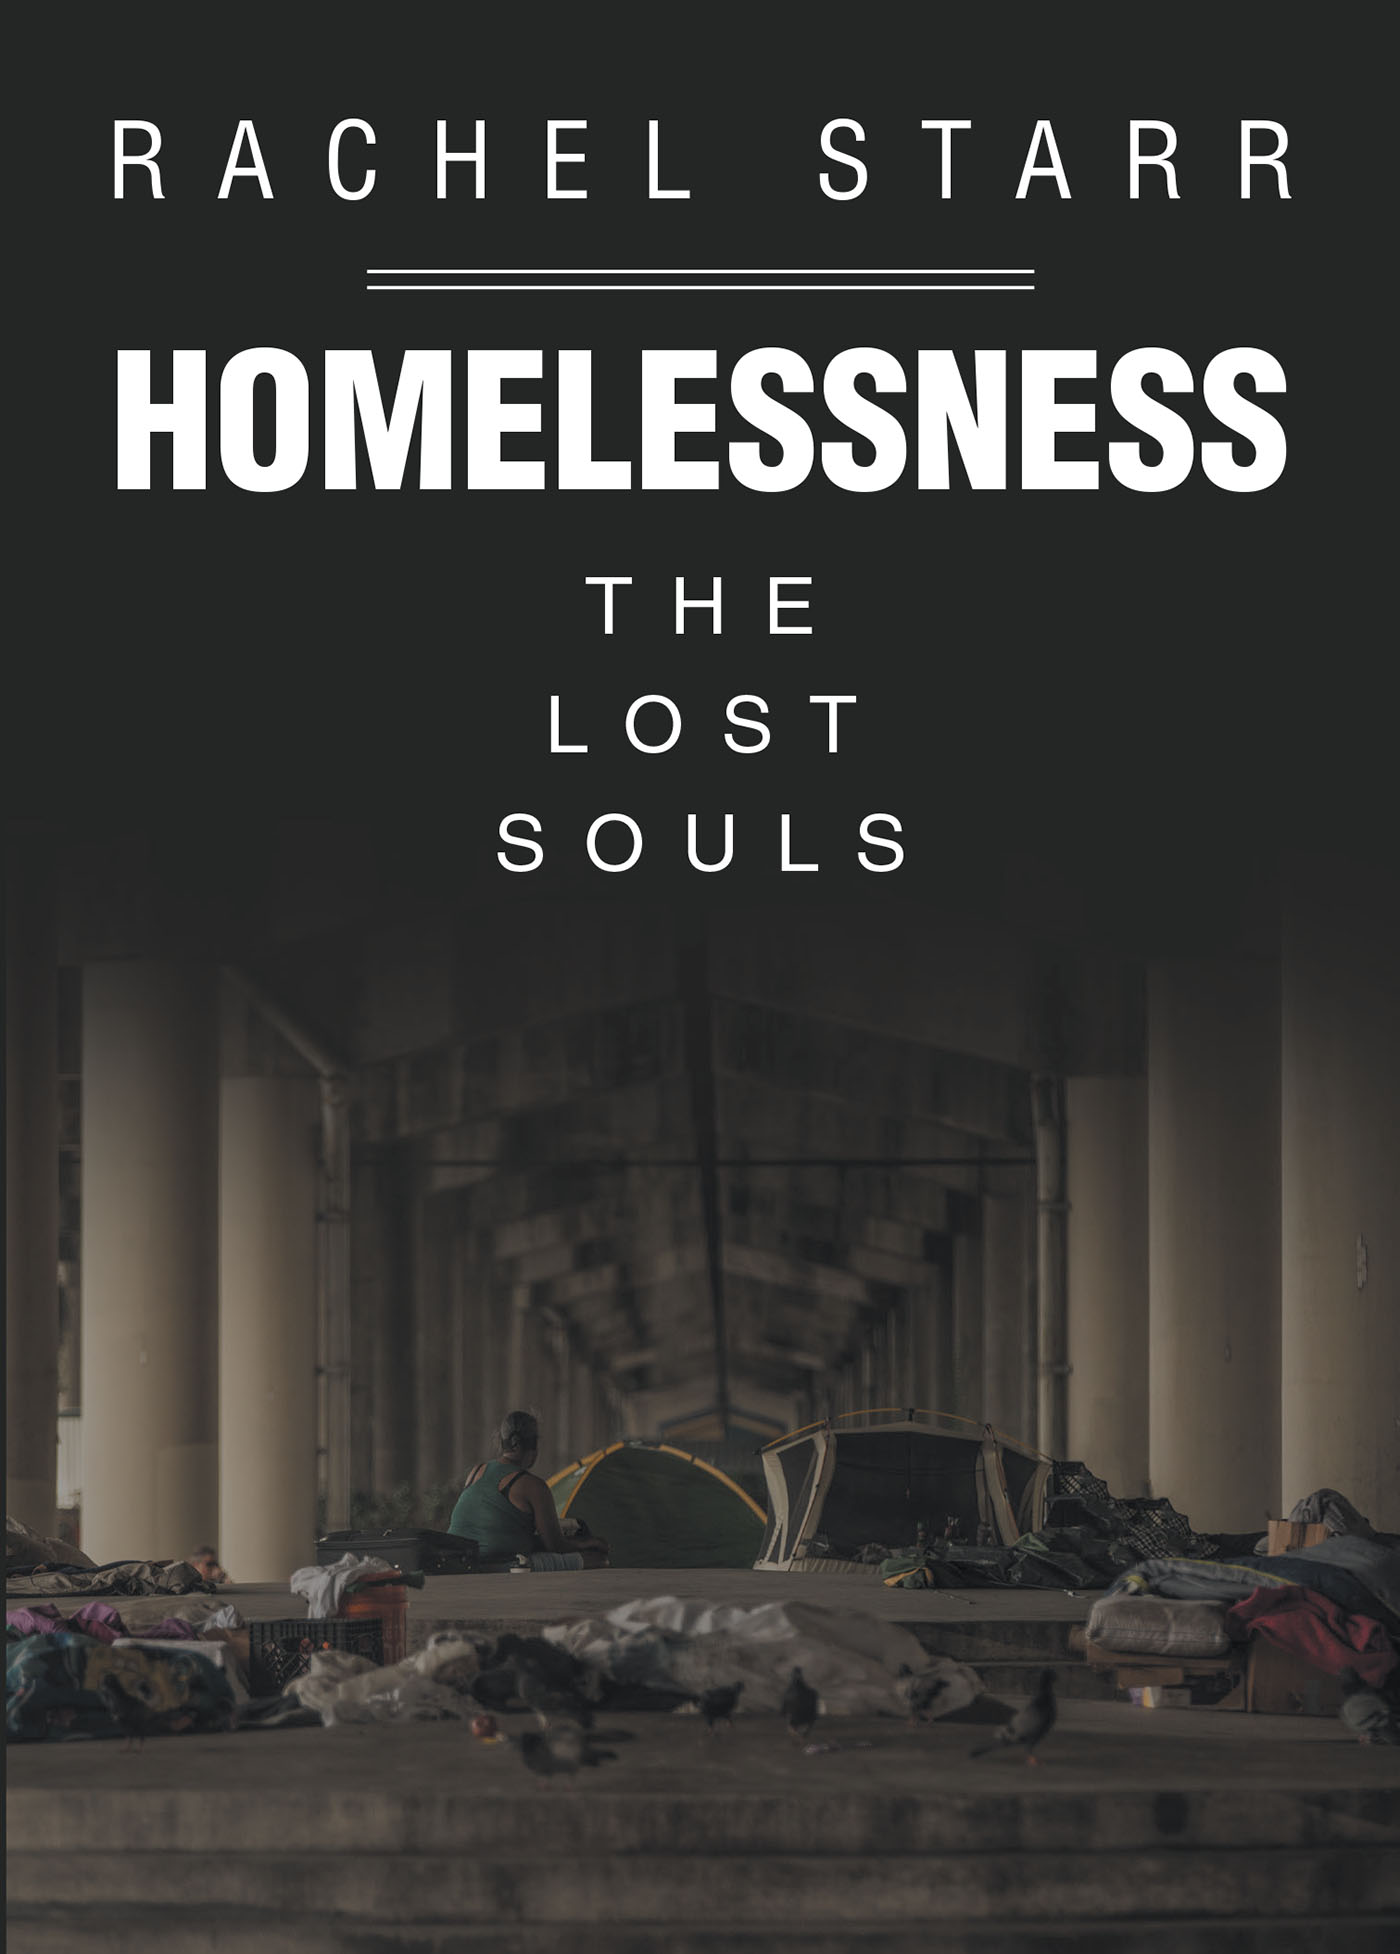 Rachel Starr’s Newly Released "Homelessness: The Lost Souls" is a Heartfelt Message About the Realities of Homelessness in America